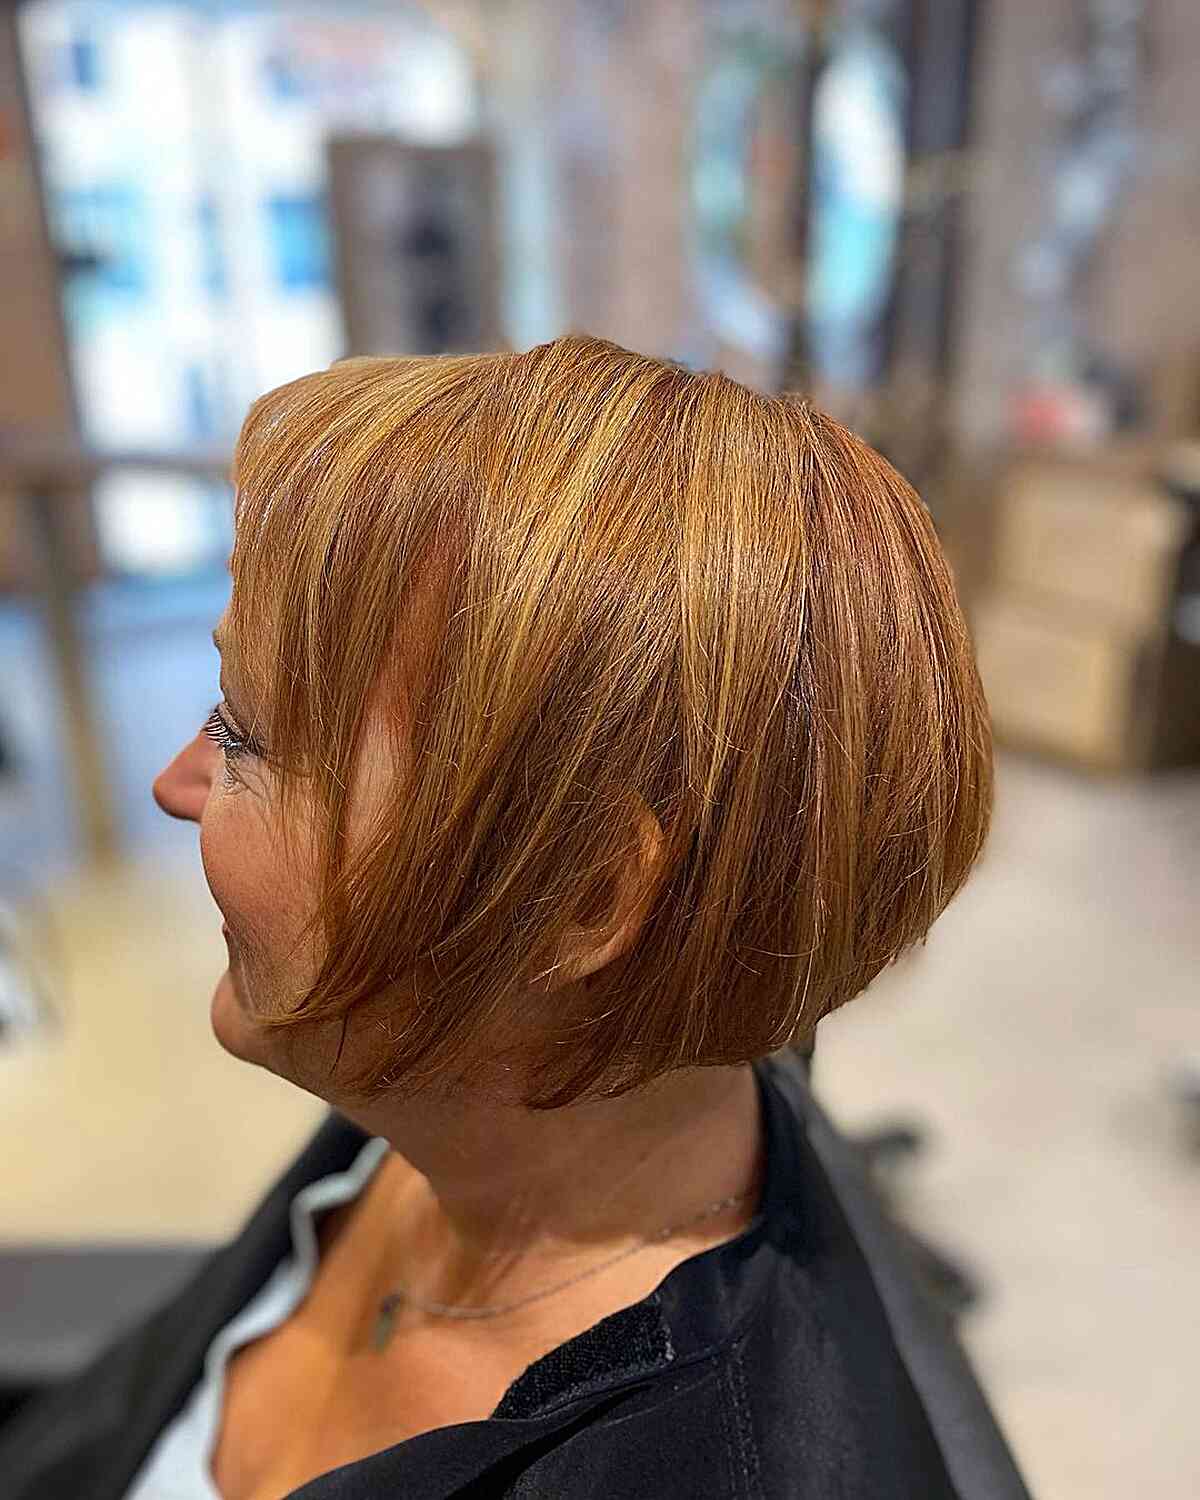 Autumn-Style Warm Strawberry Blonde Tone for Older Ladies Over 60 Short Hair